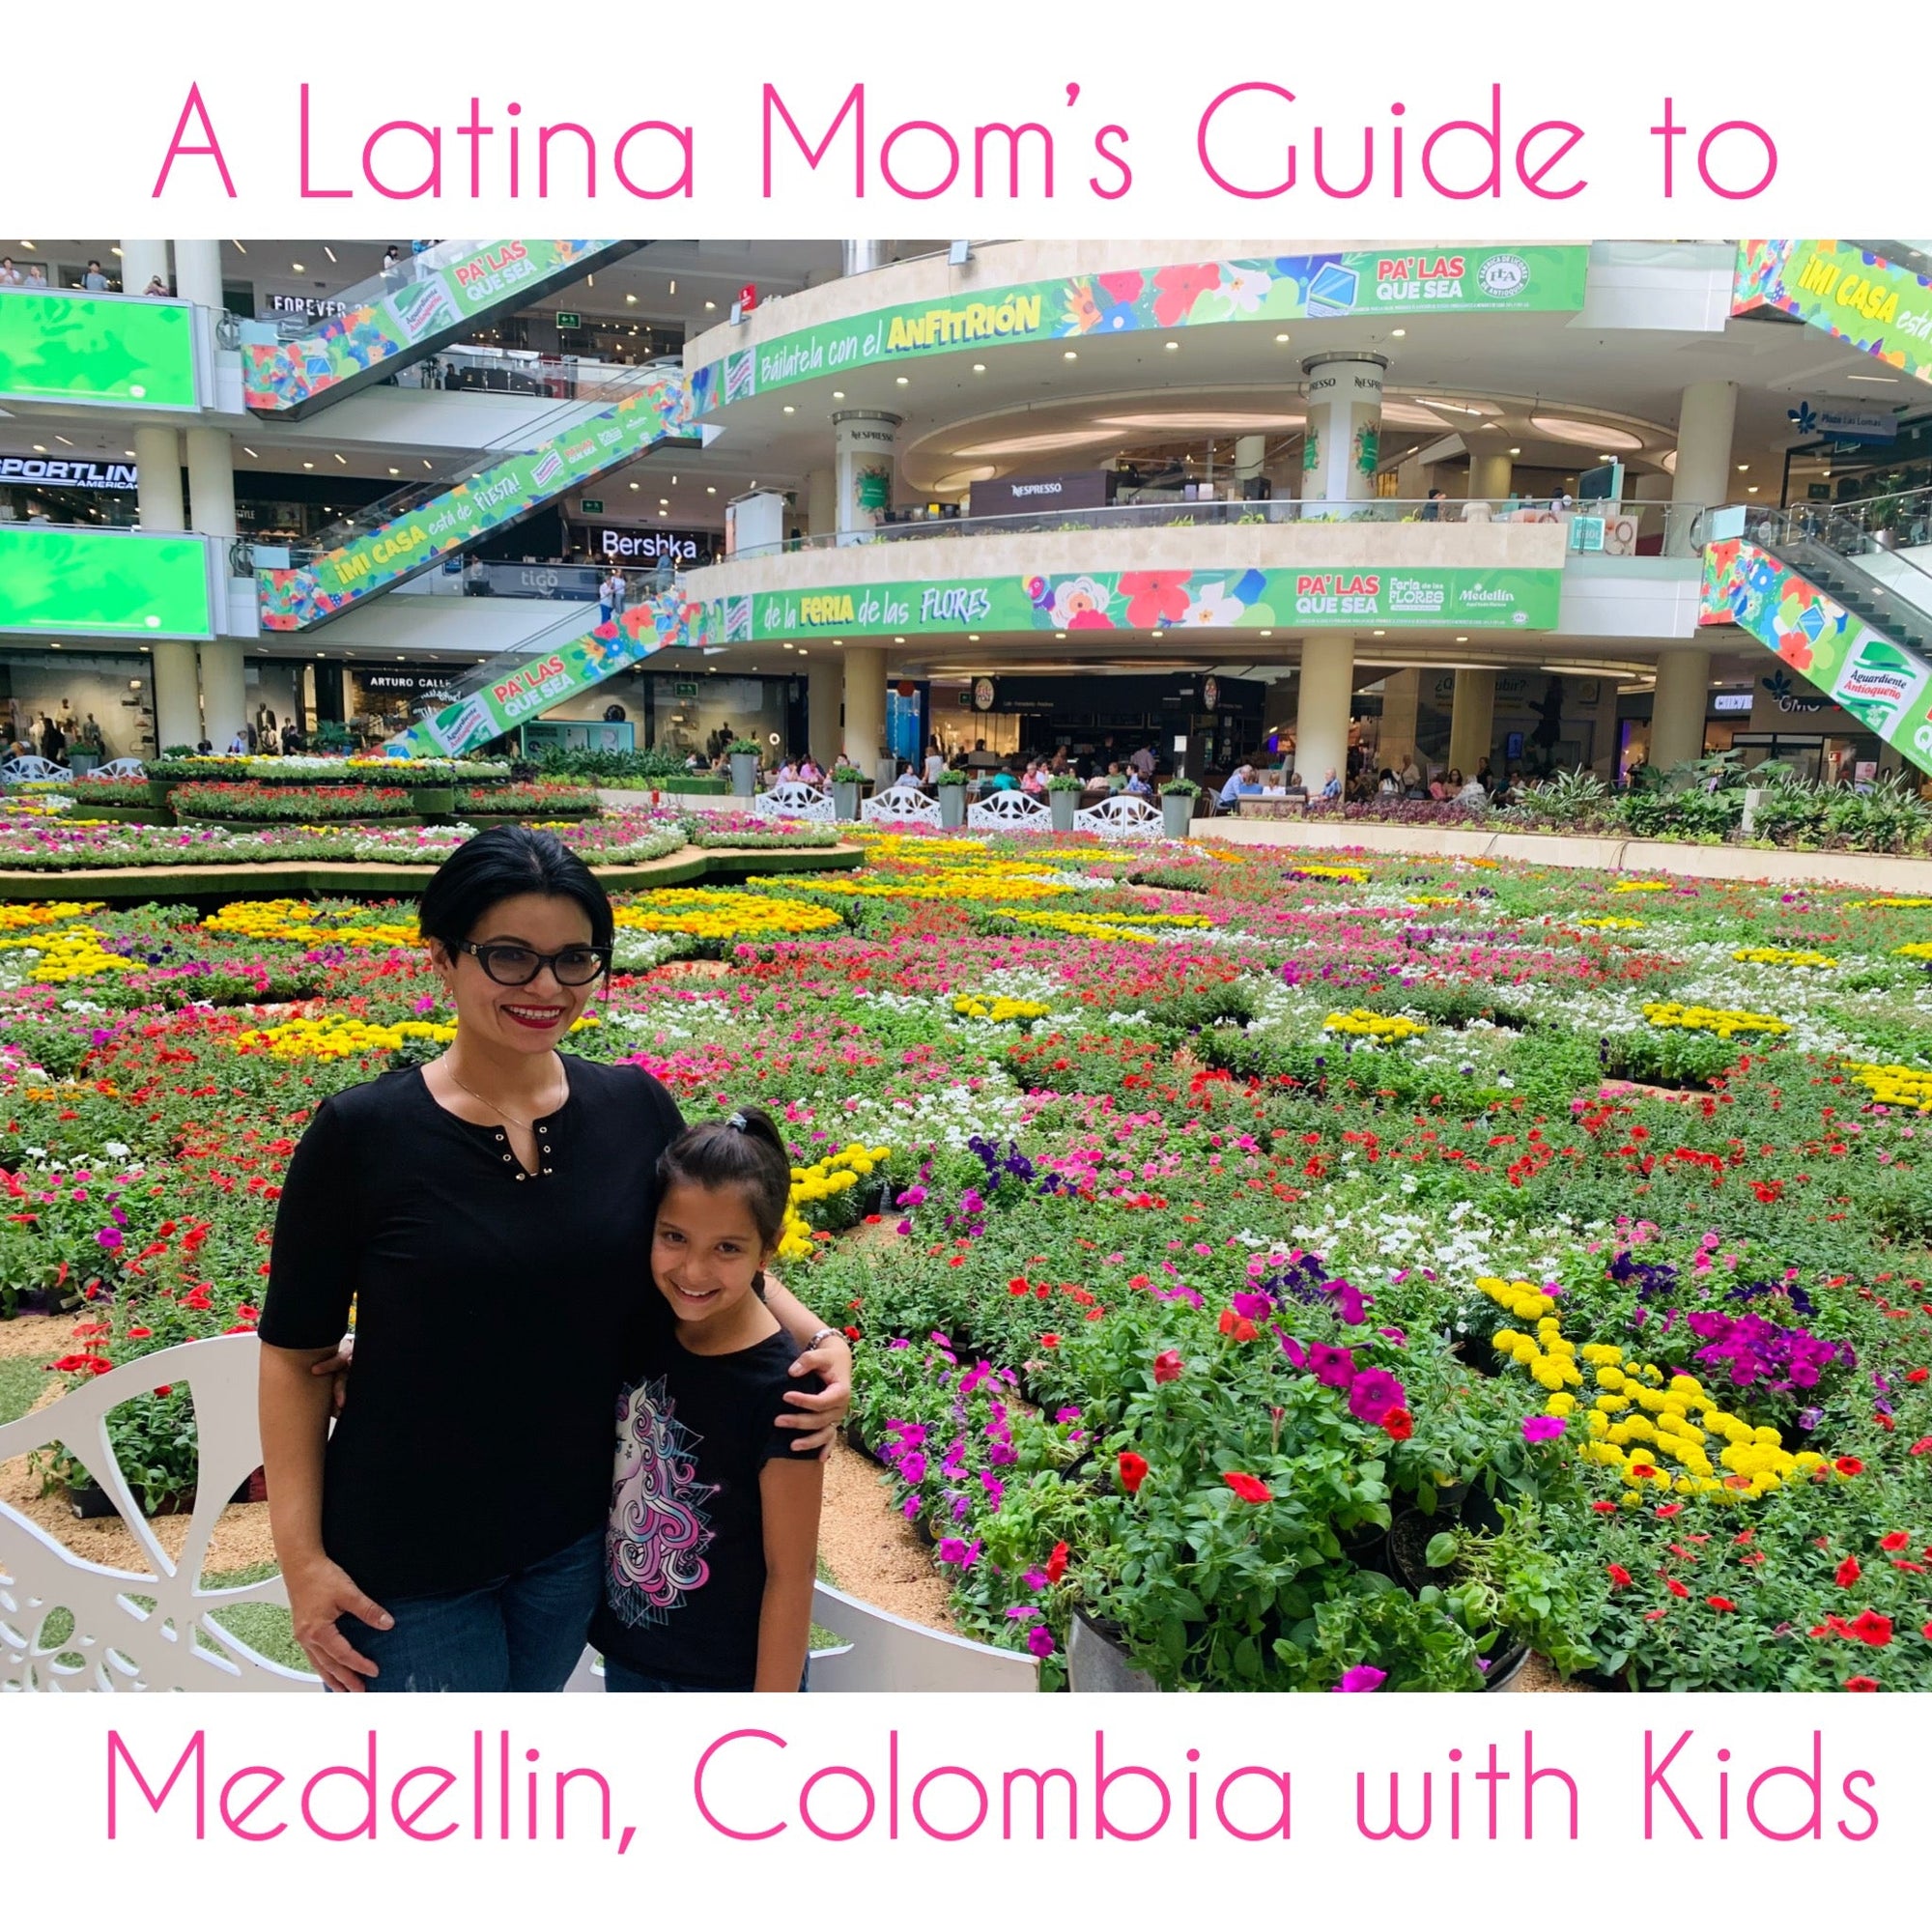 A Latina Mom's Guide for Traveling to Medellin, Colombia with Kids - Mi LegaSi